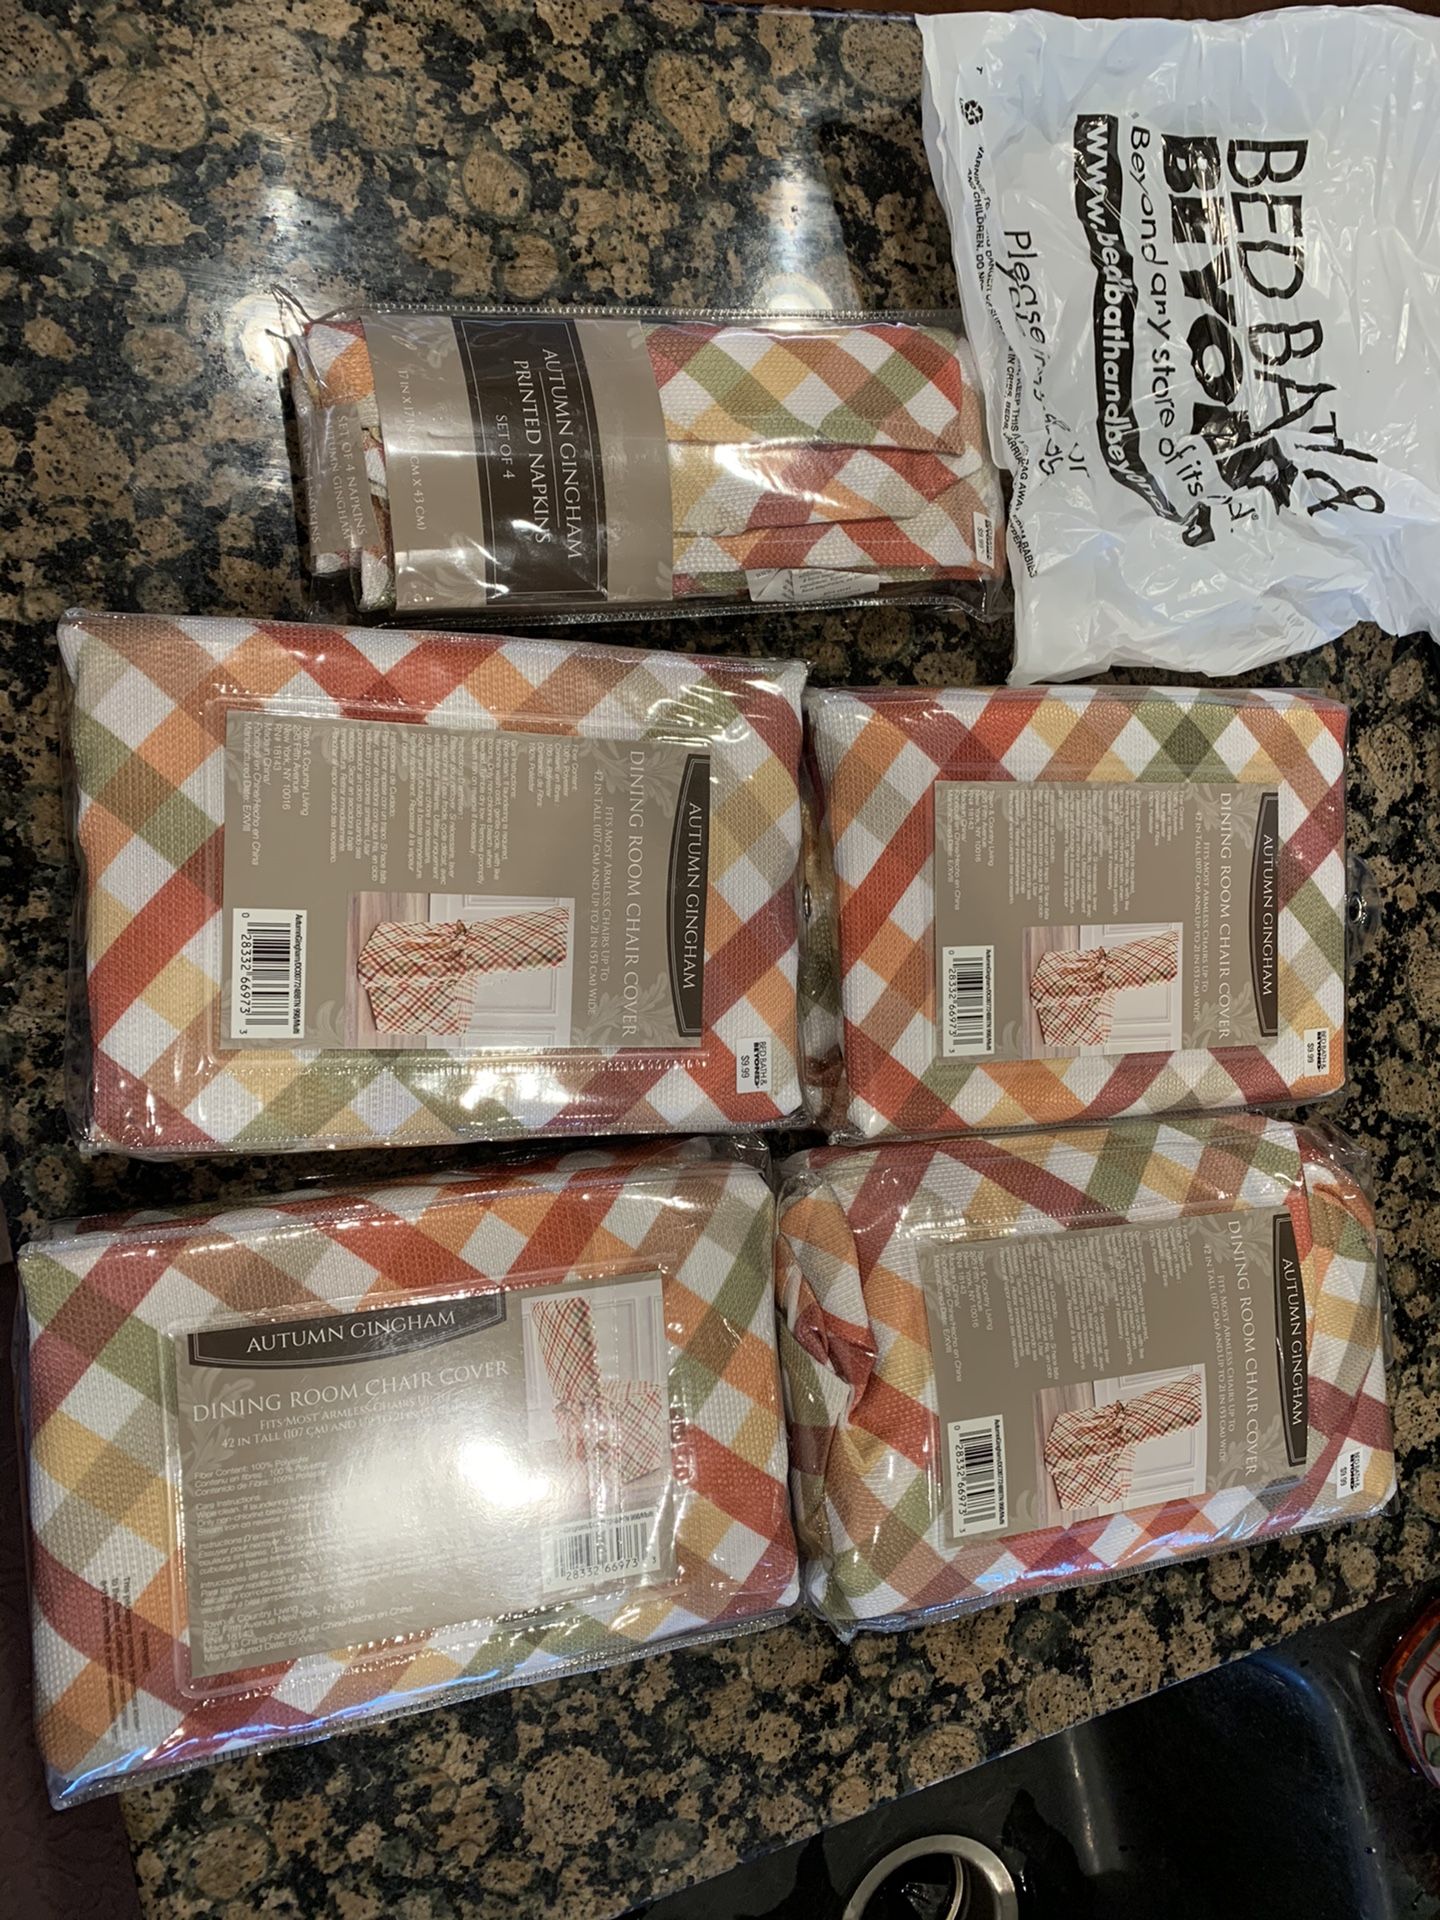 Autumn Gingham dining room chair covers and 4 matching cloth napkins